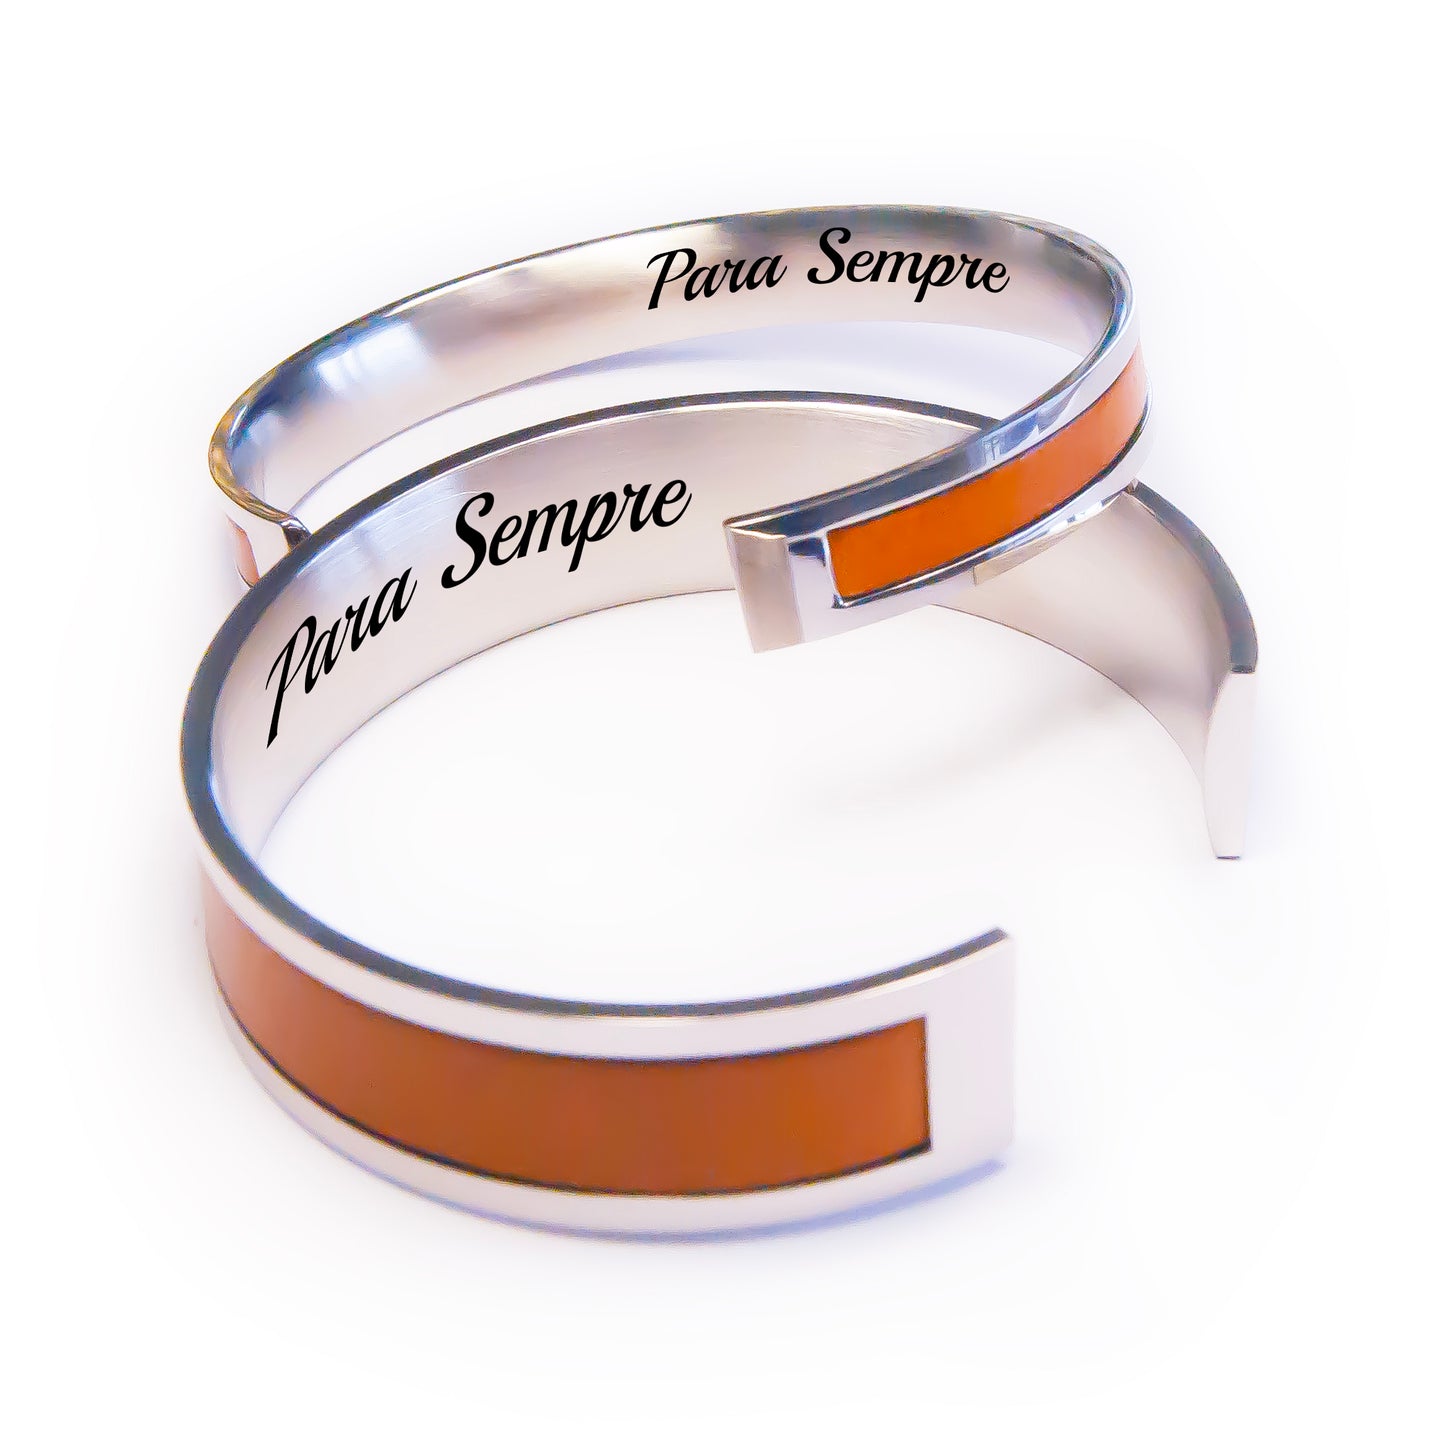 Personalized Gift for Couples Matching Bracelets - Custom Anniversary Gift